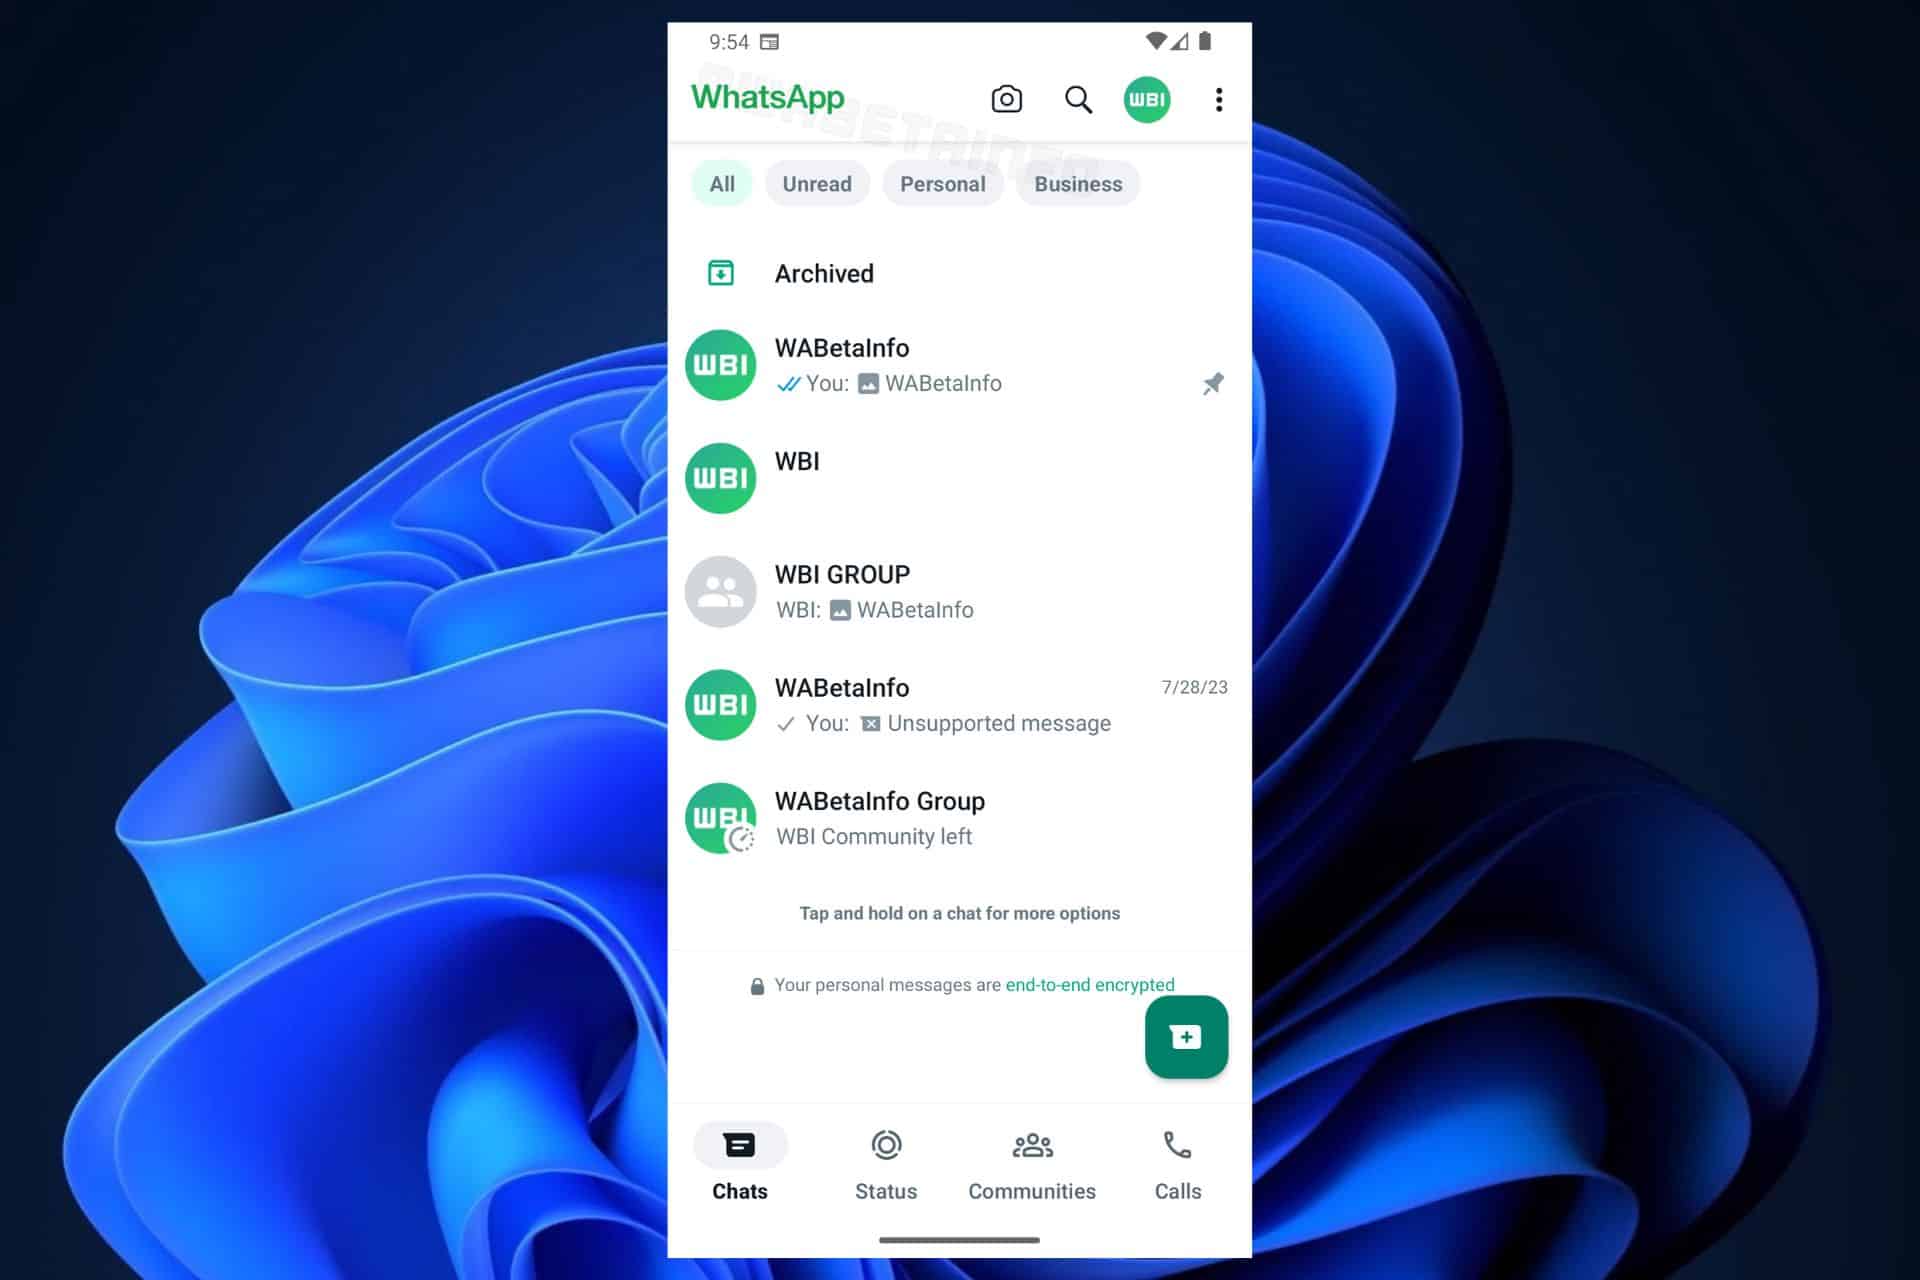 whatsapp interface on android